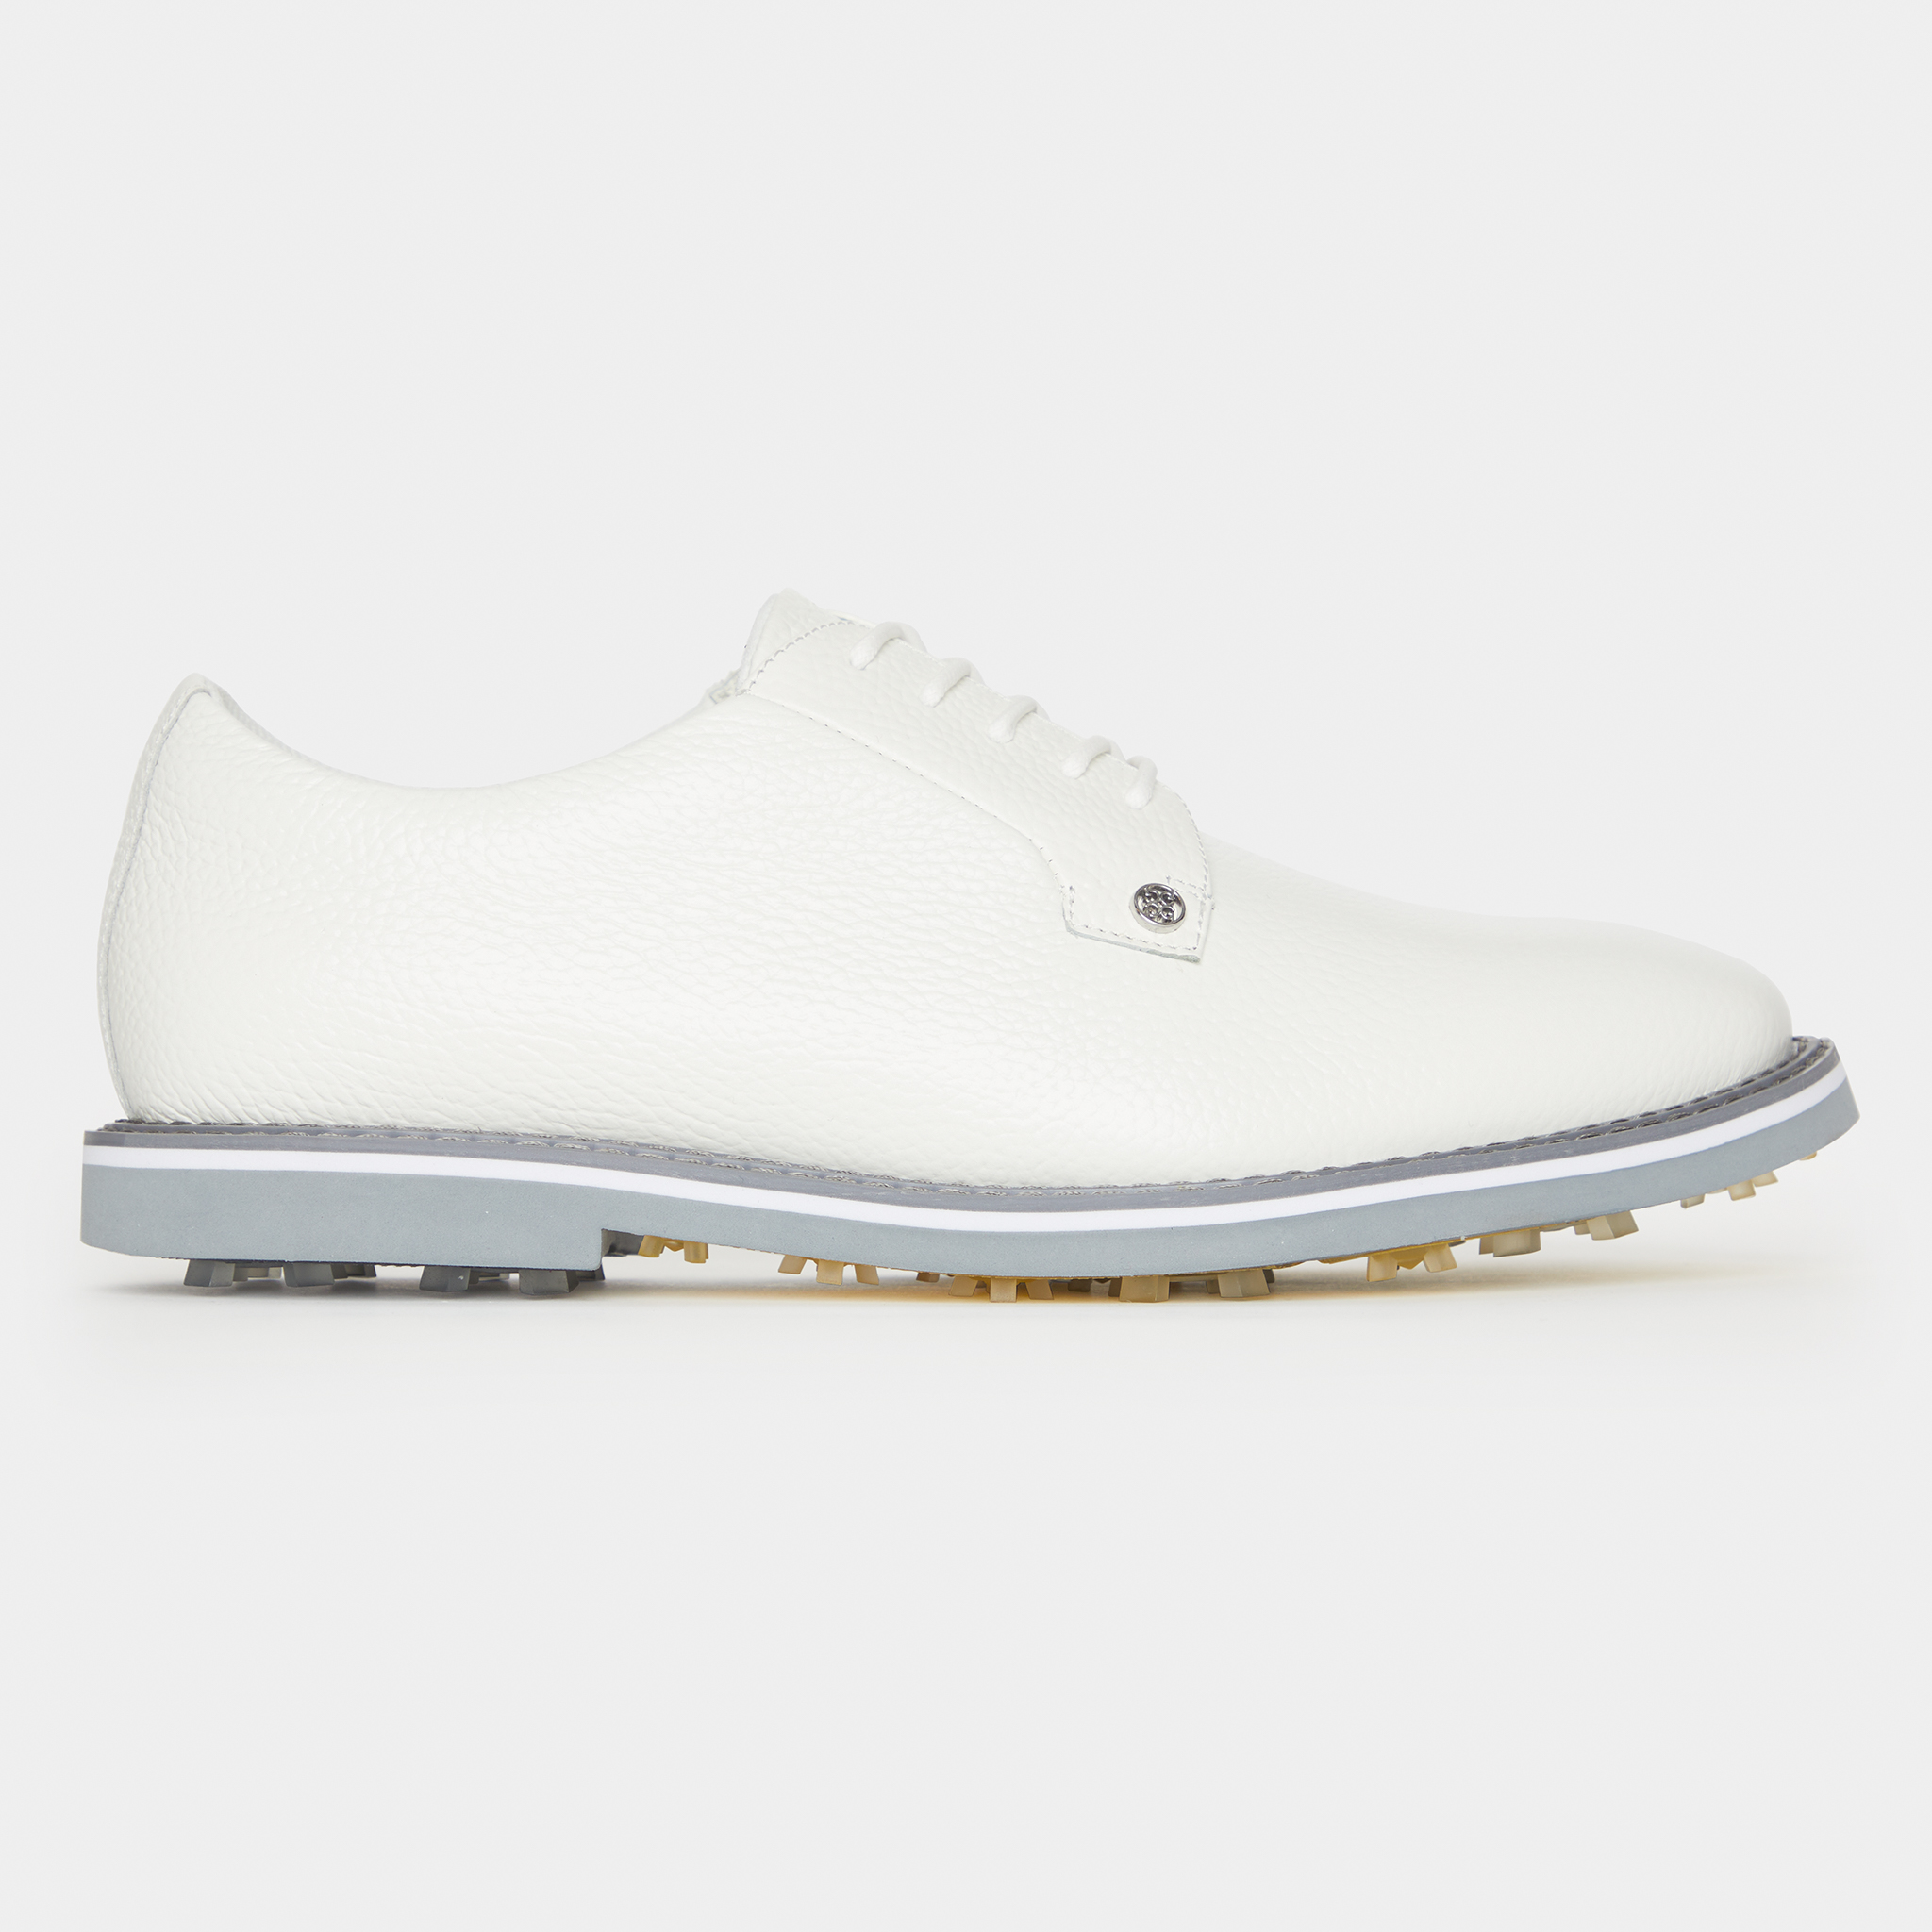 G/FORE】MEN´S GALLIVANTER PERFORATED LEATHER GOLF SHOE